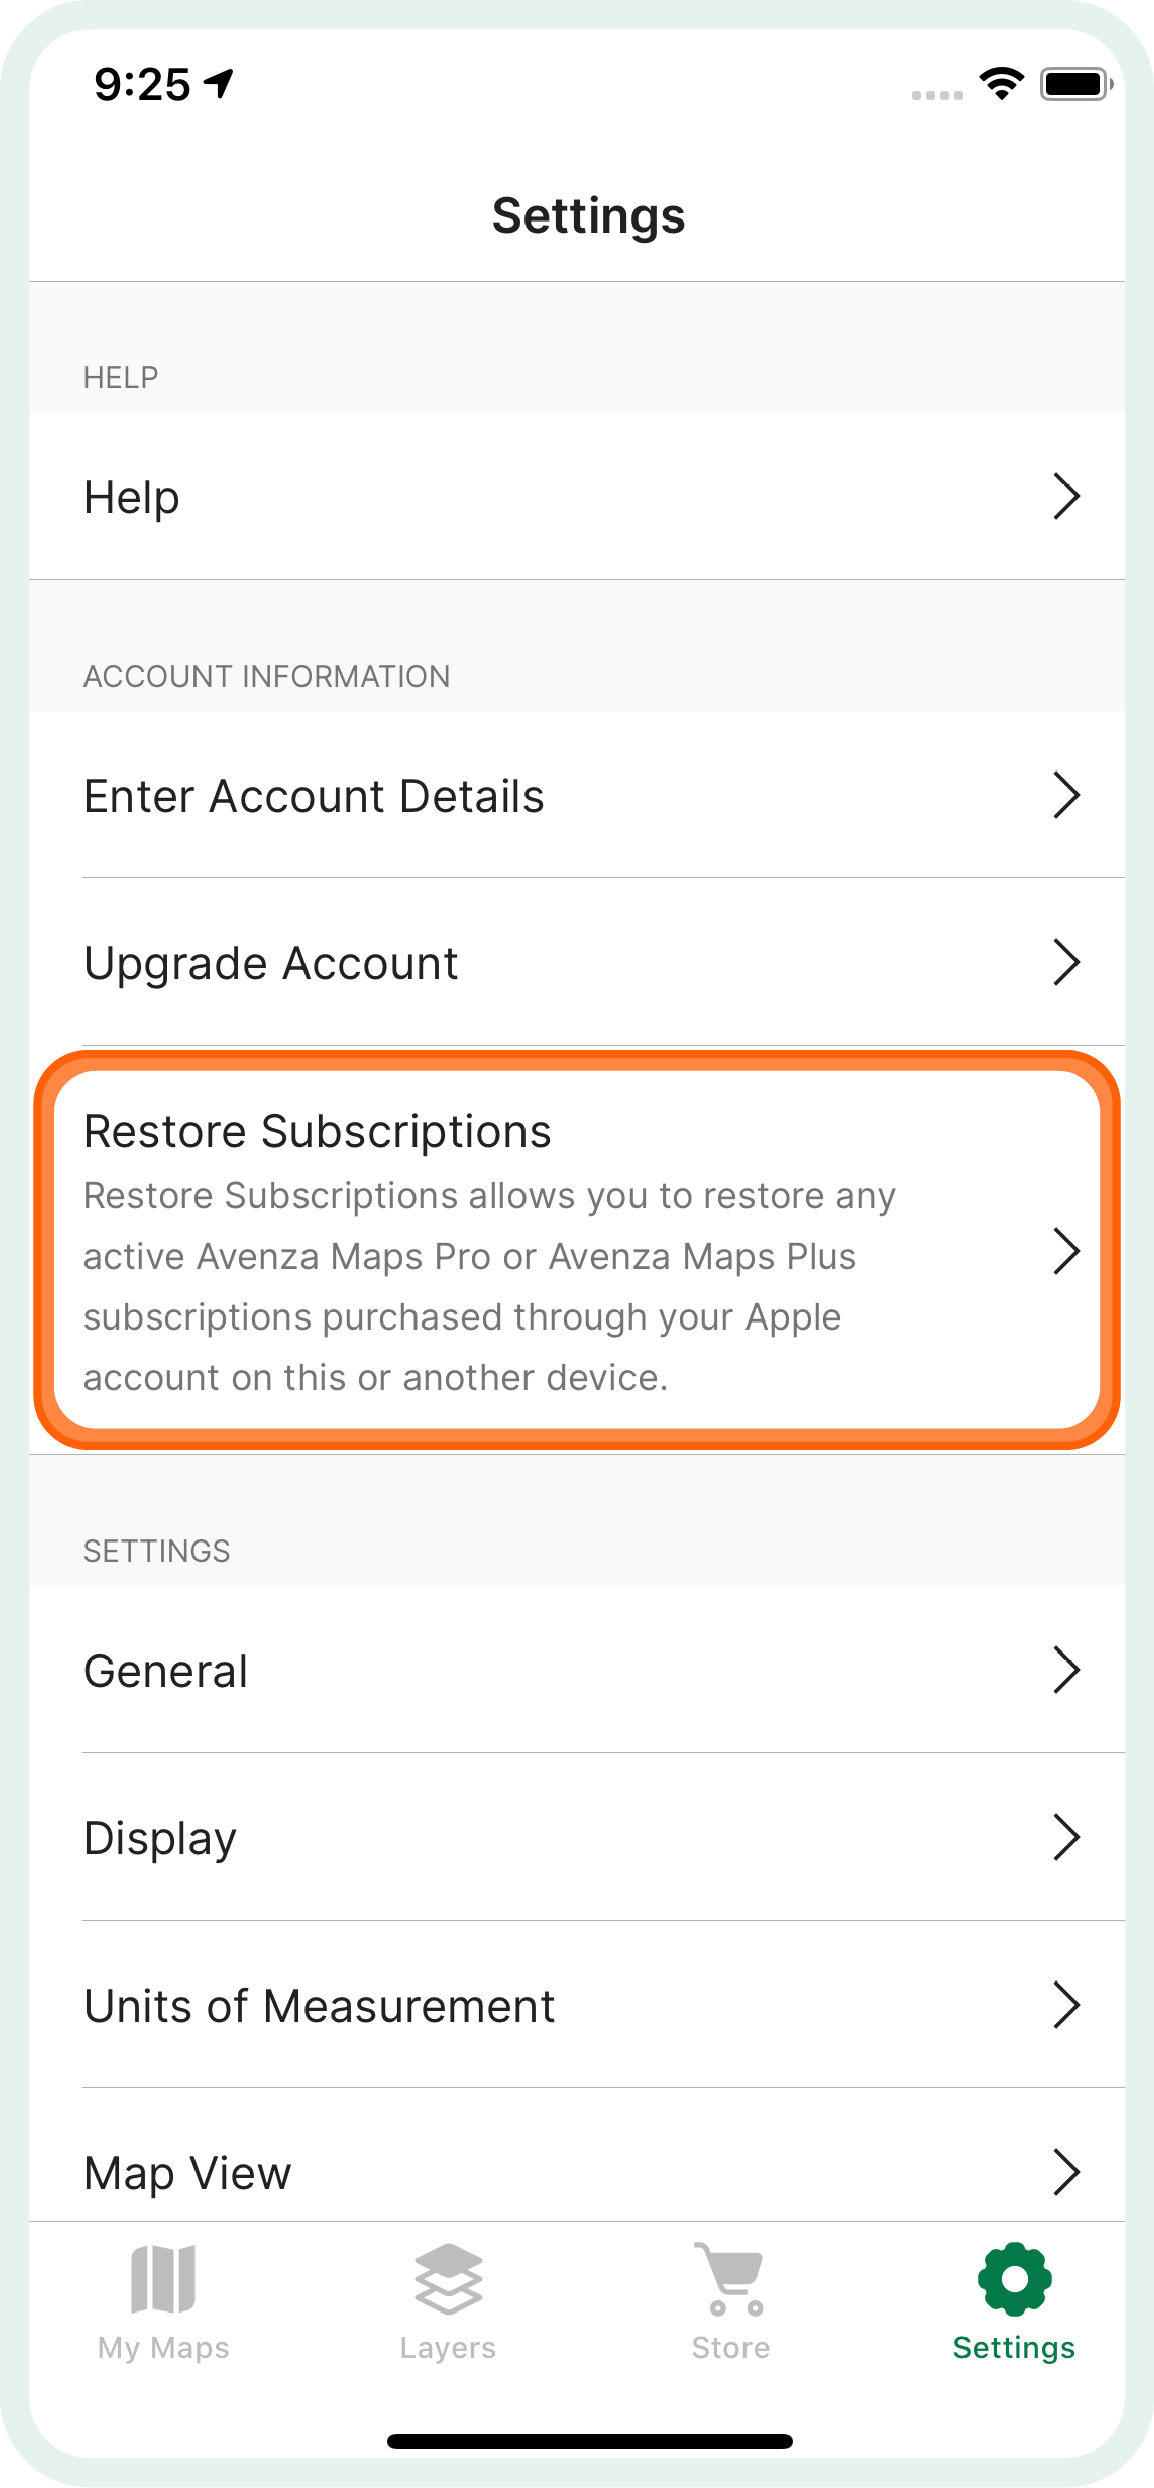 Renewing_a_subscription_-_Restore_Subscription.png